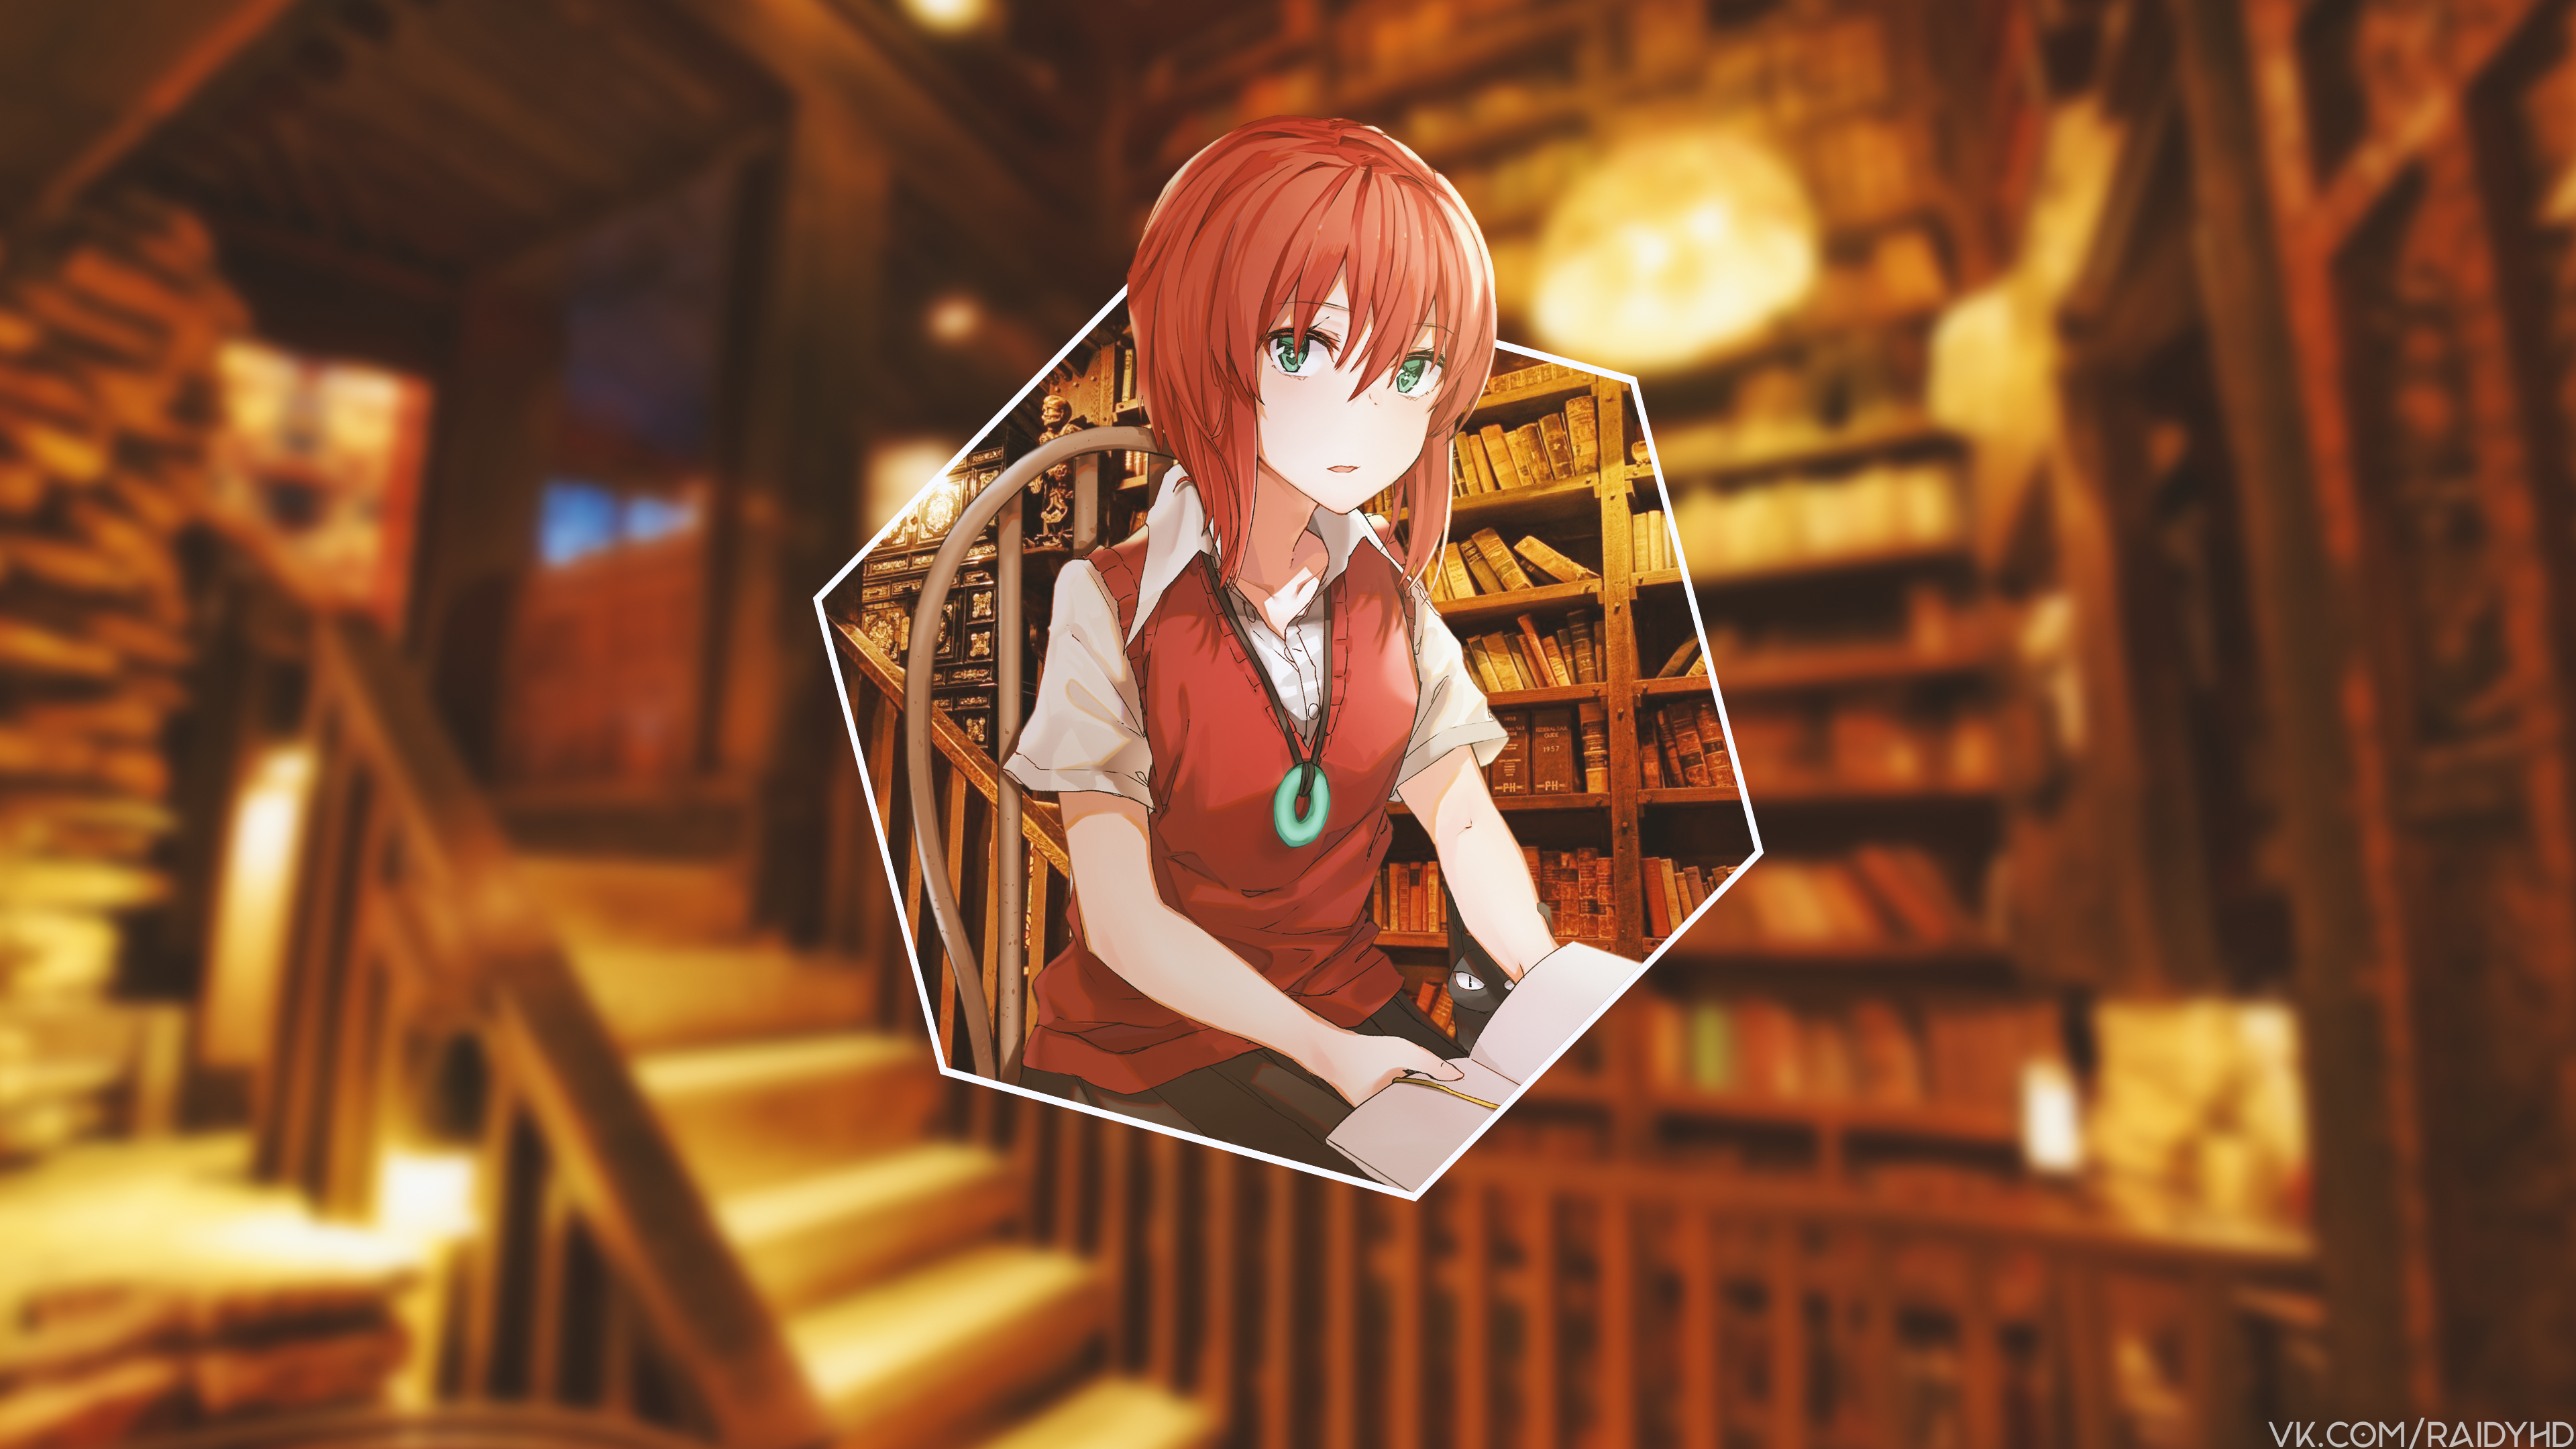 Anime Anime Girls Picture In Picture Hatori Chise 3840x2160